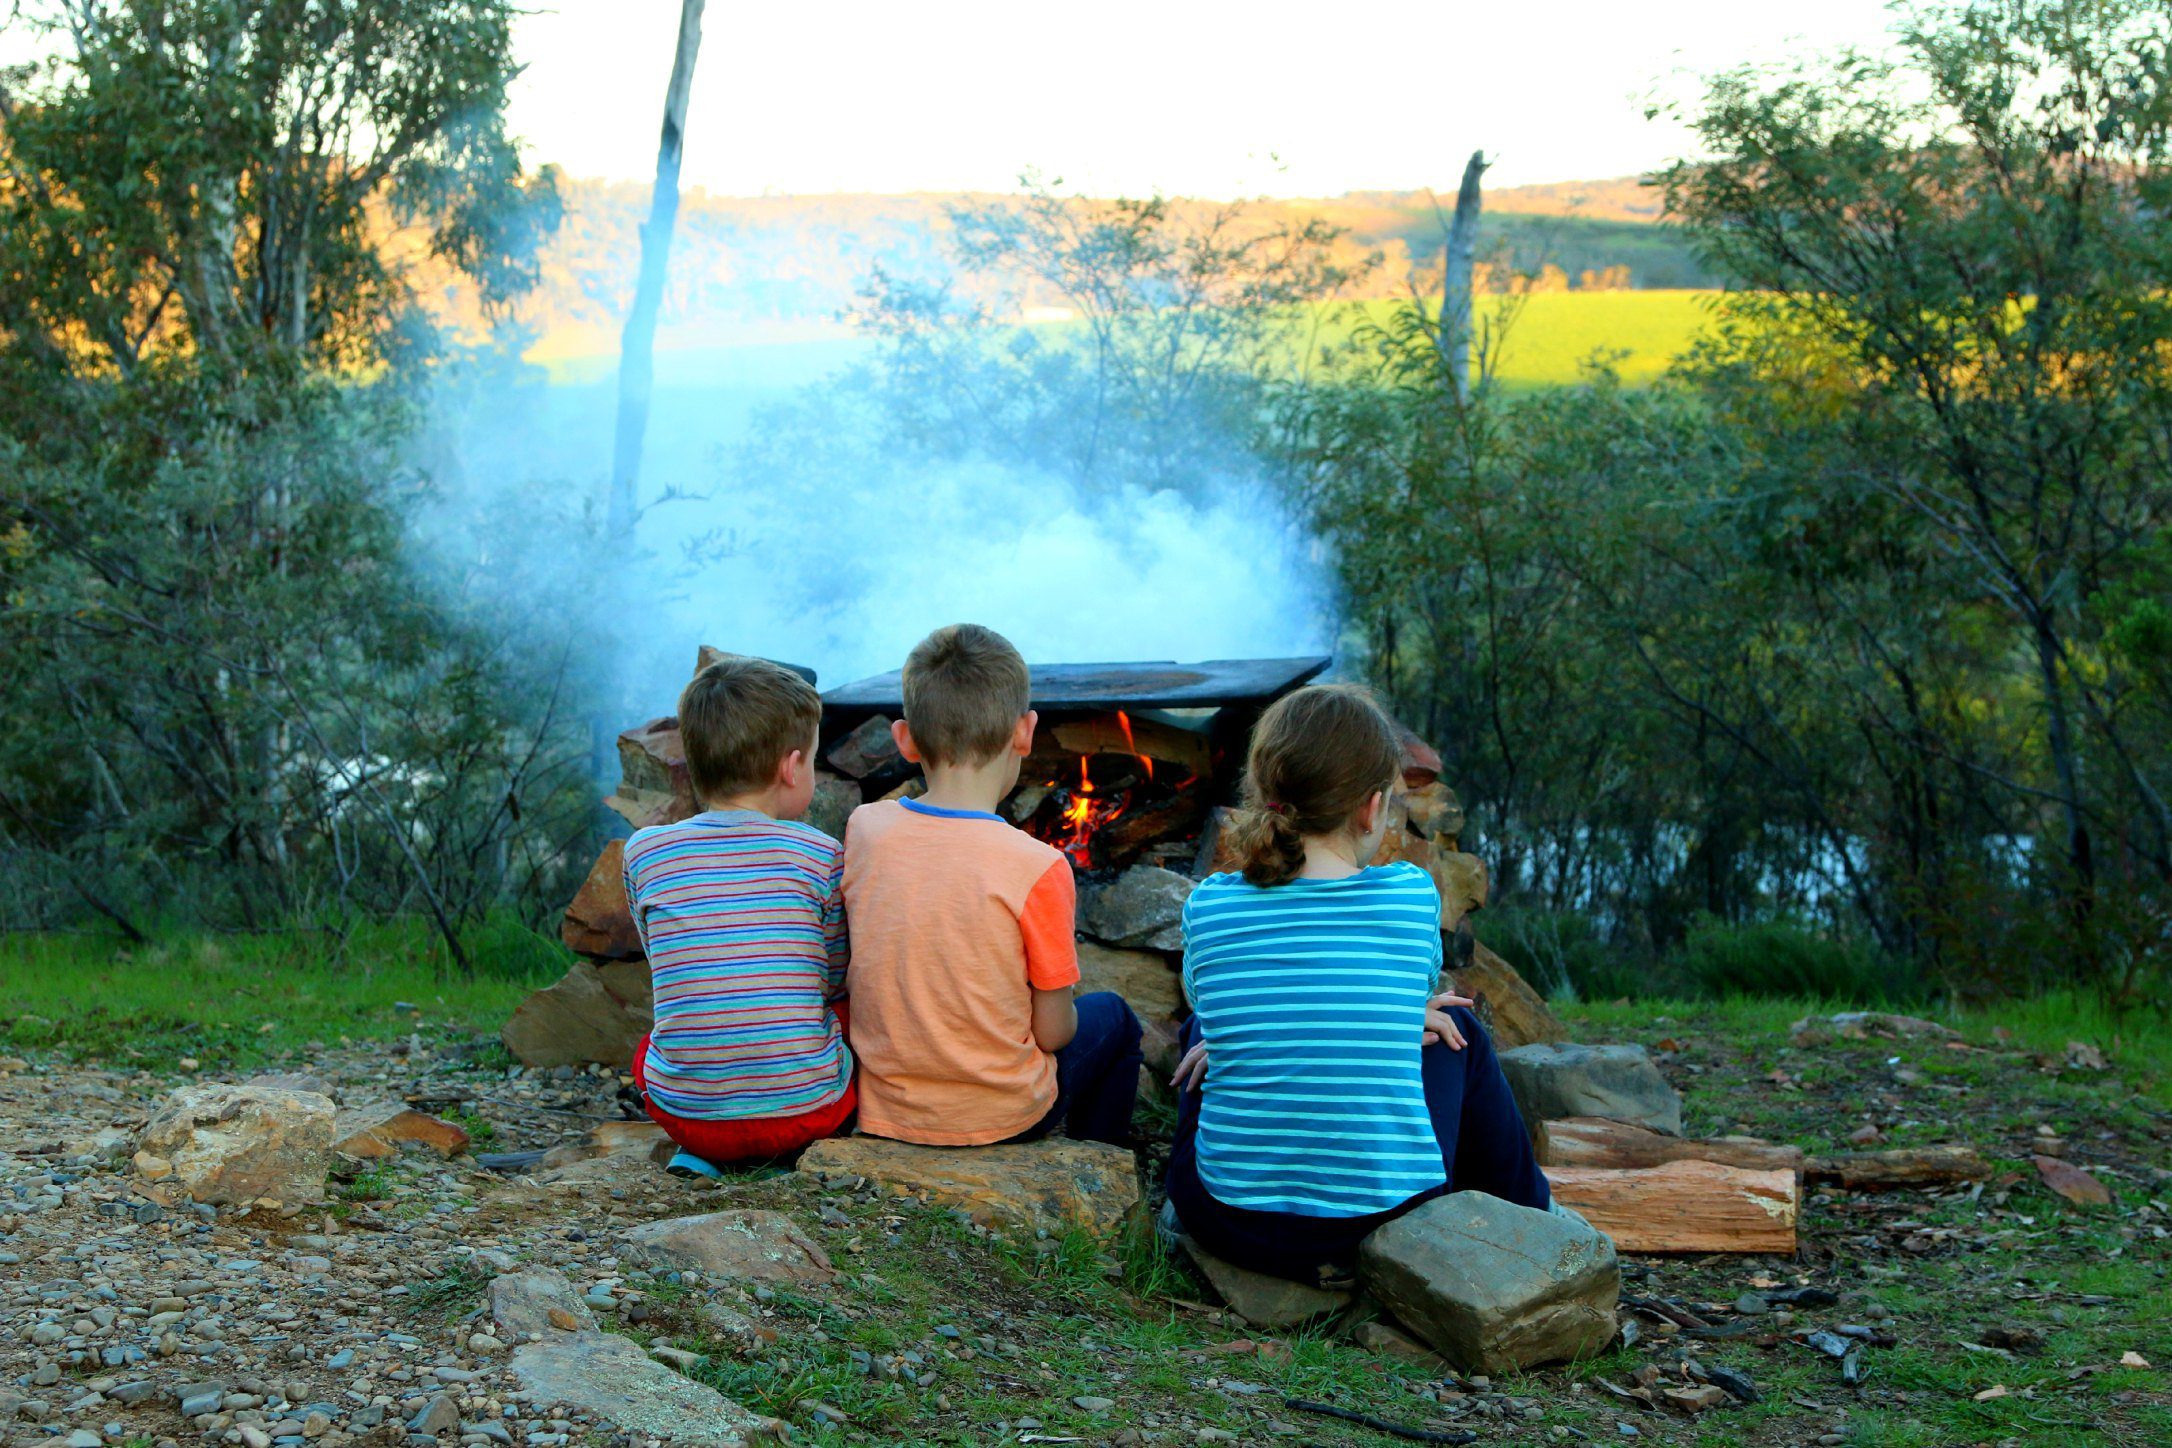 A Classic Australian Family Experience - Watching the Campfire